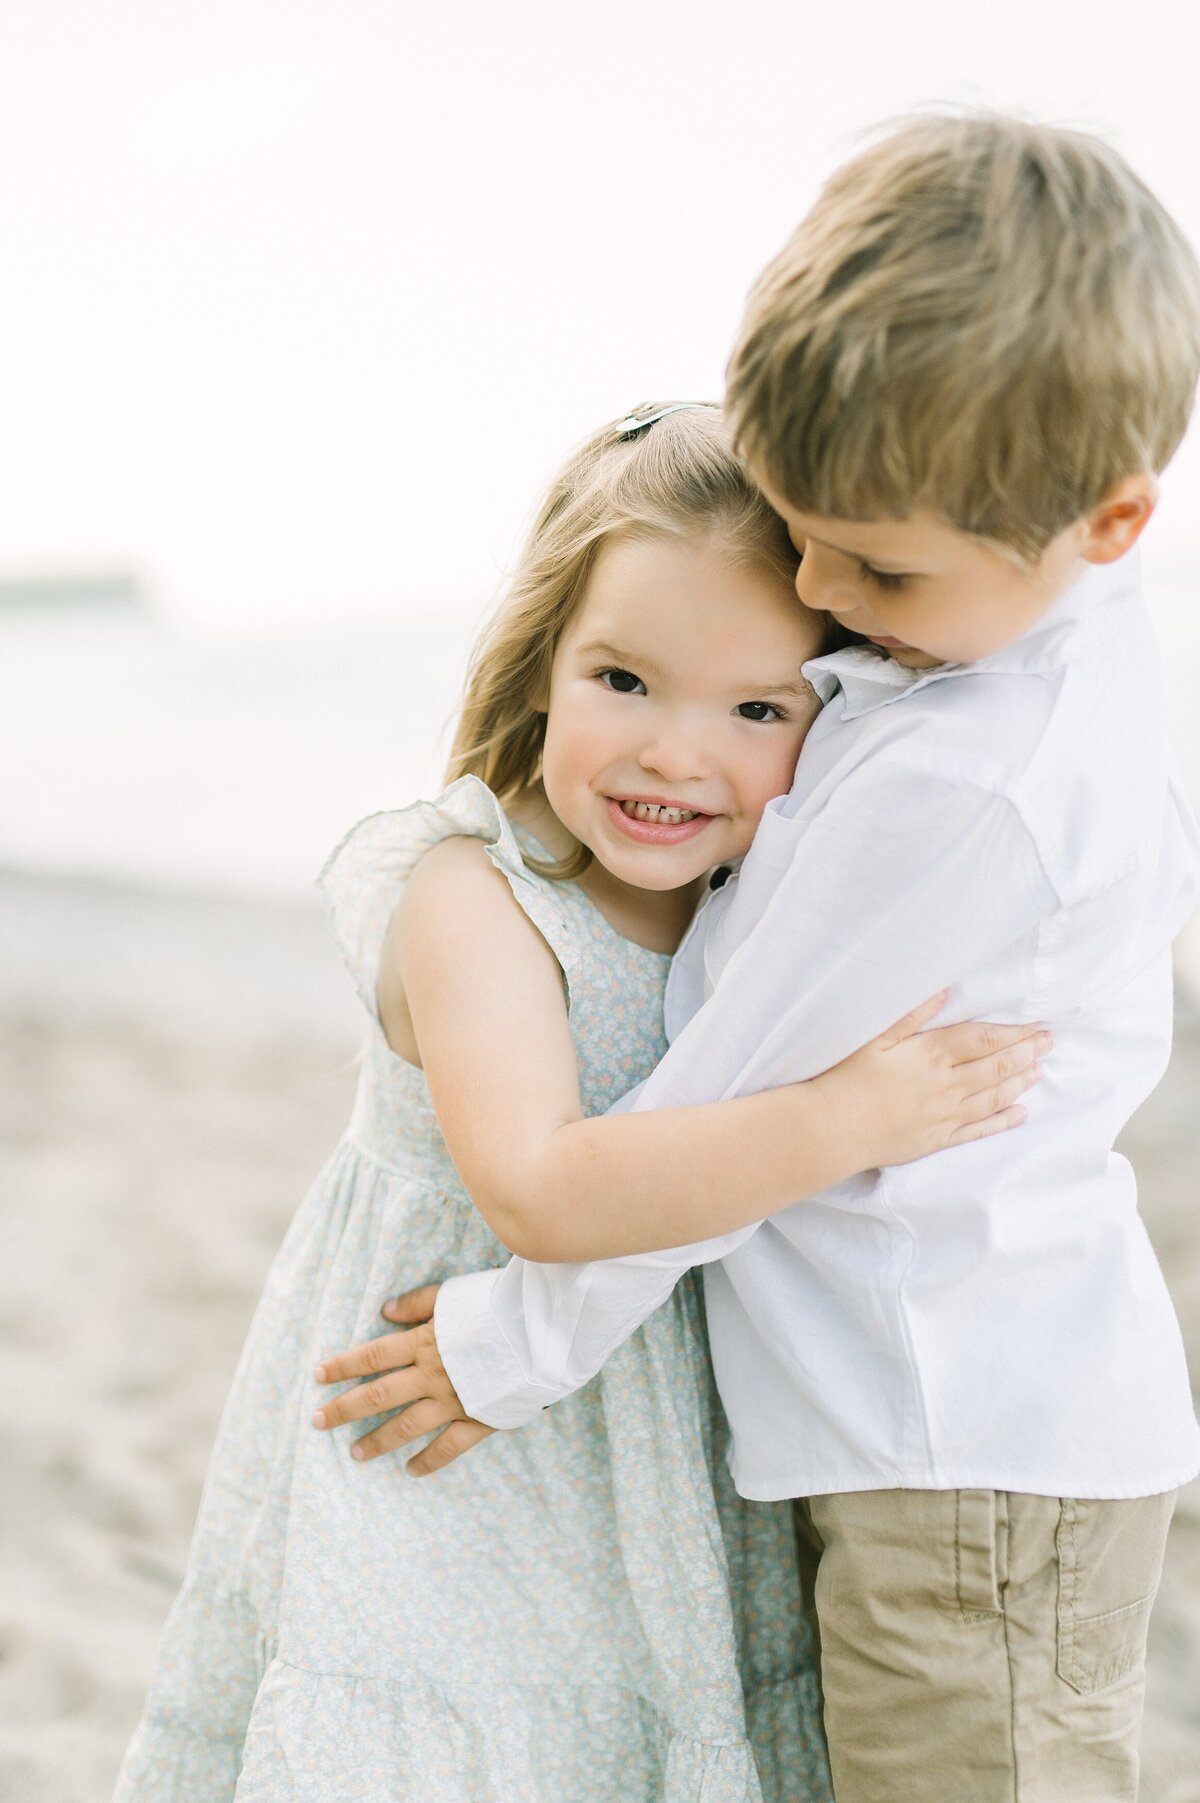 Two siblings hugging on the beach, with the brother smiling at his sister